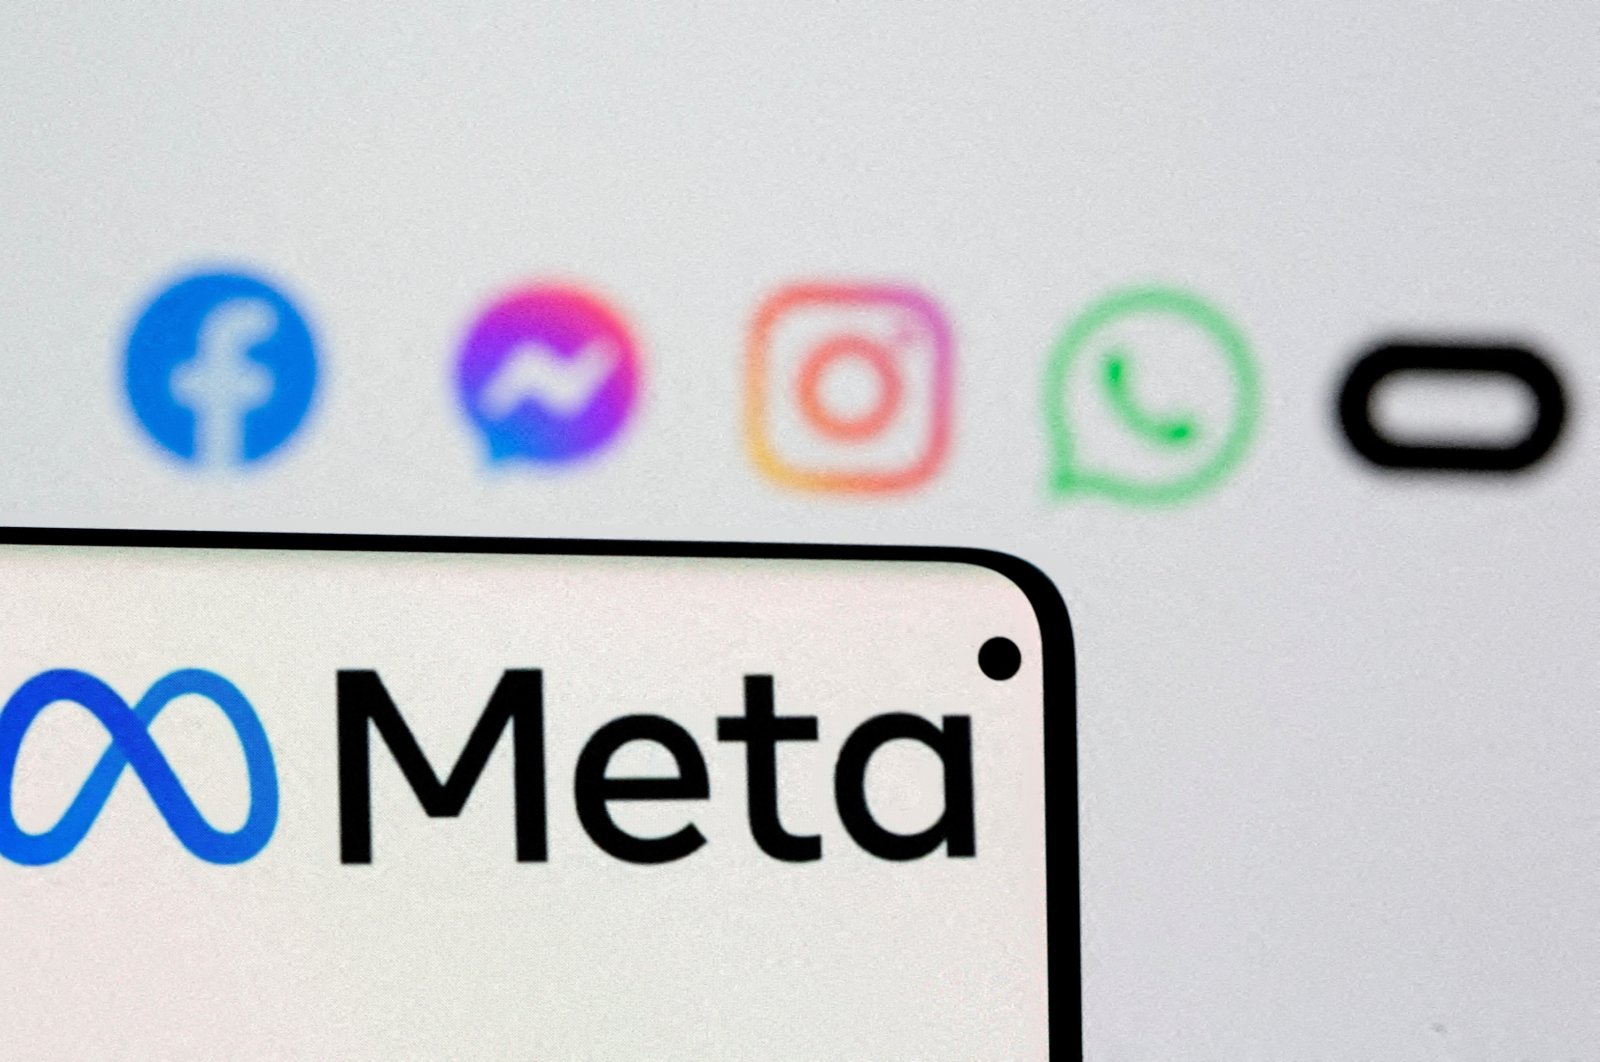 Facebook&#039;s new rebrand logo Meta is seen on smartphone in front of a displayed logo of Facebook, Messenger, Instagram, WhatsApp and Oculus in this illustration picture taken Oct. 28, 2021. (Reuters Photo)